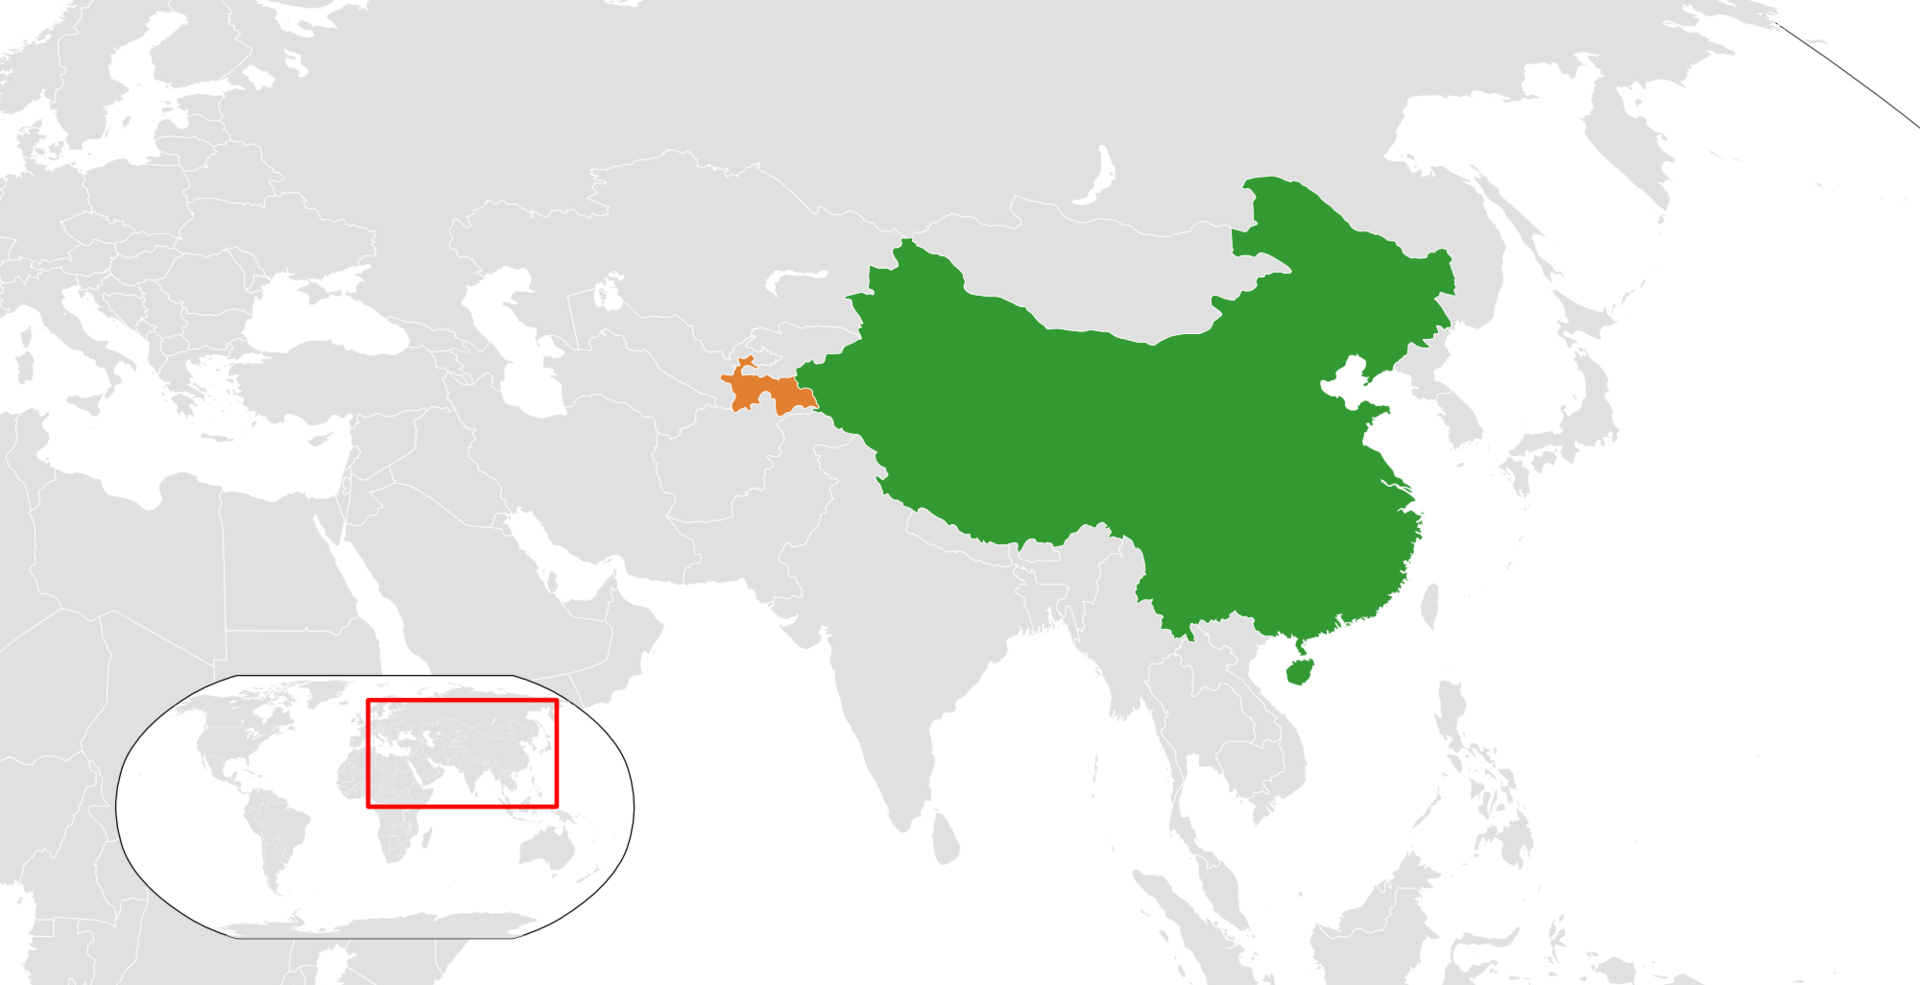 Map indicating locations of China and Tajikistan